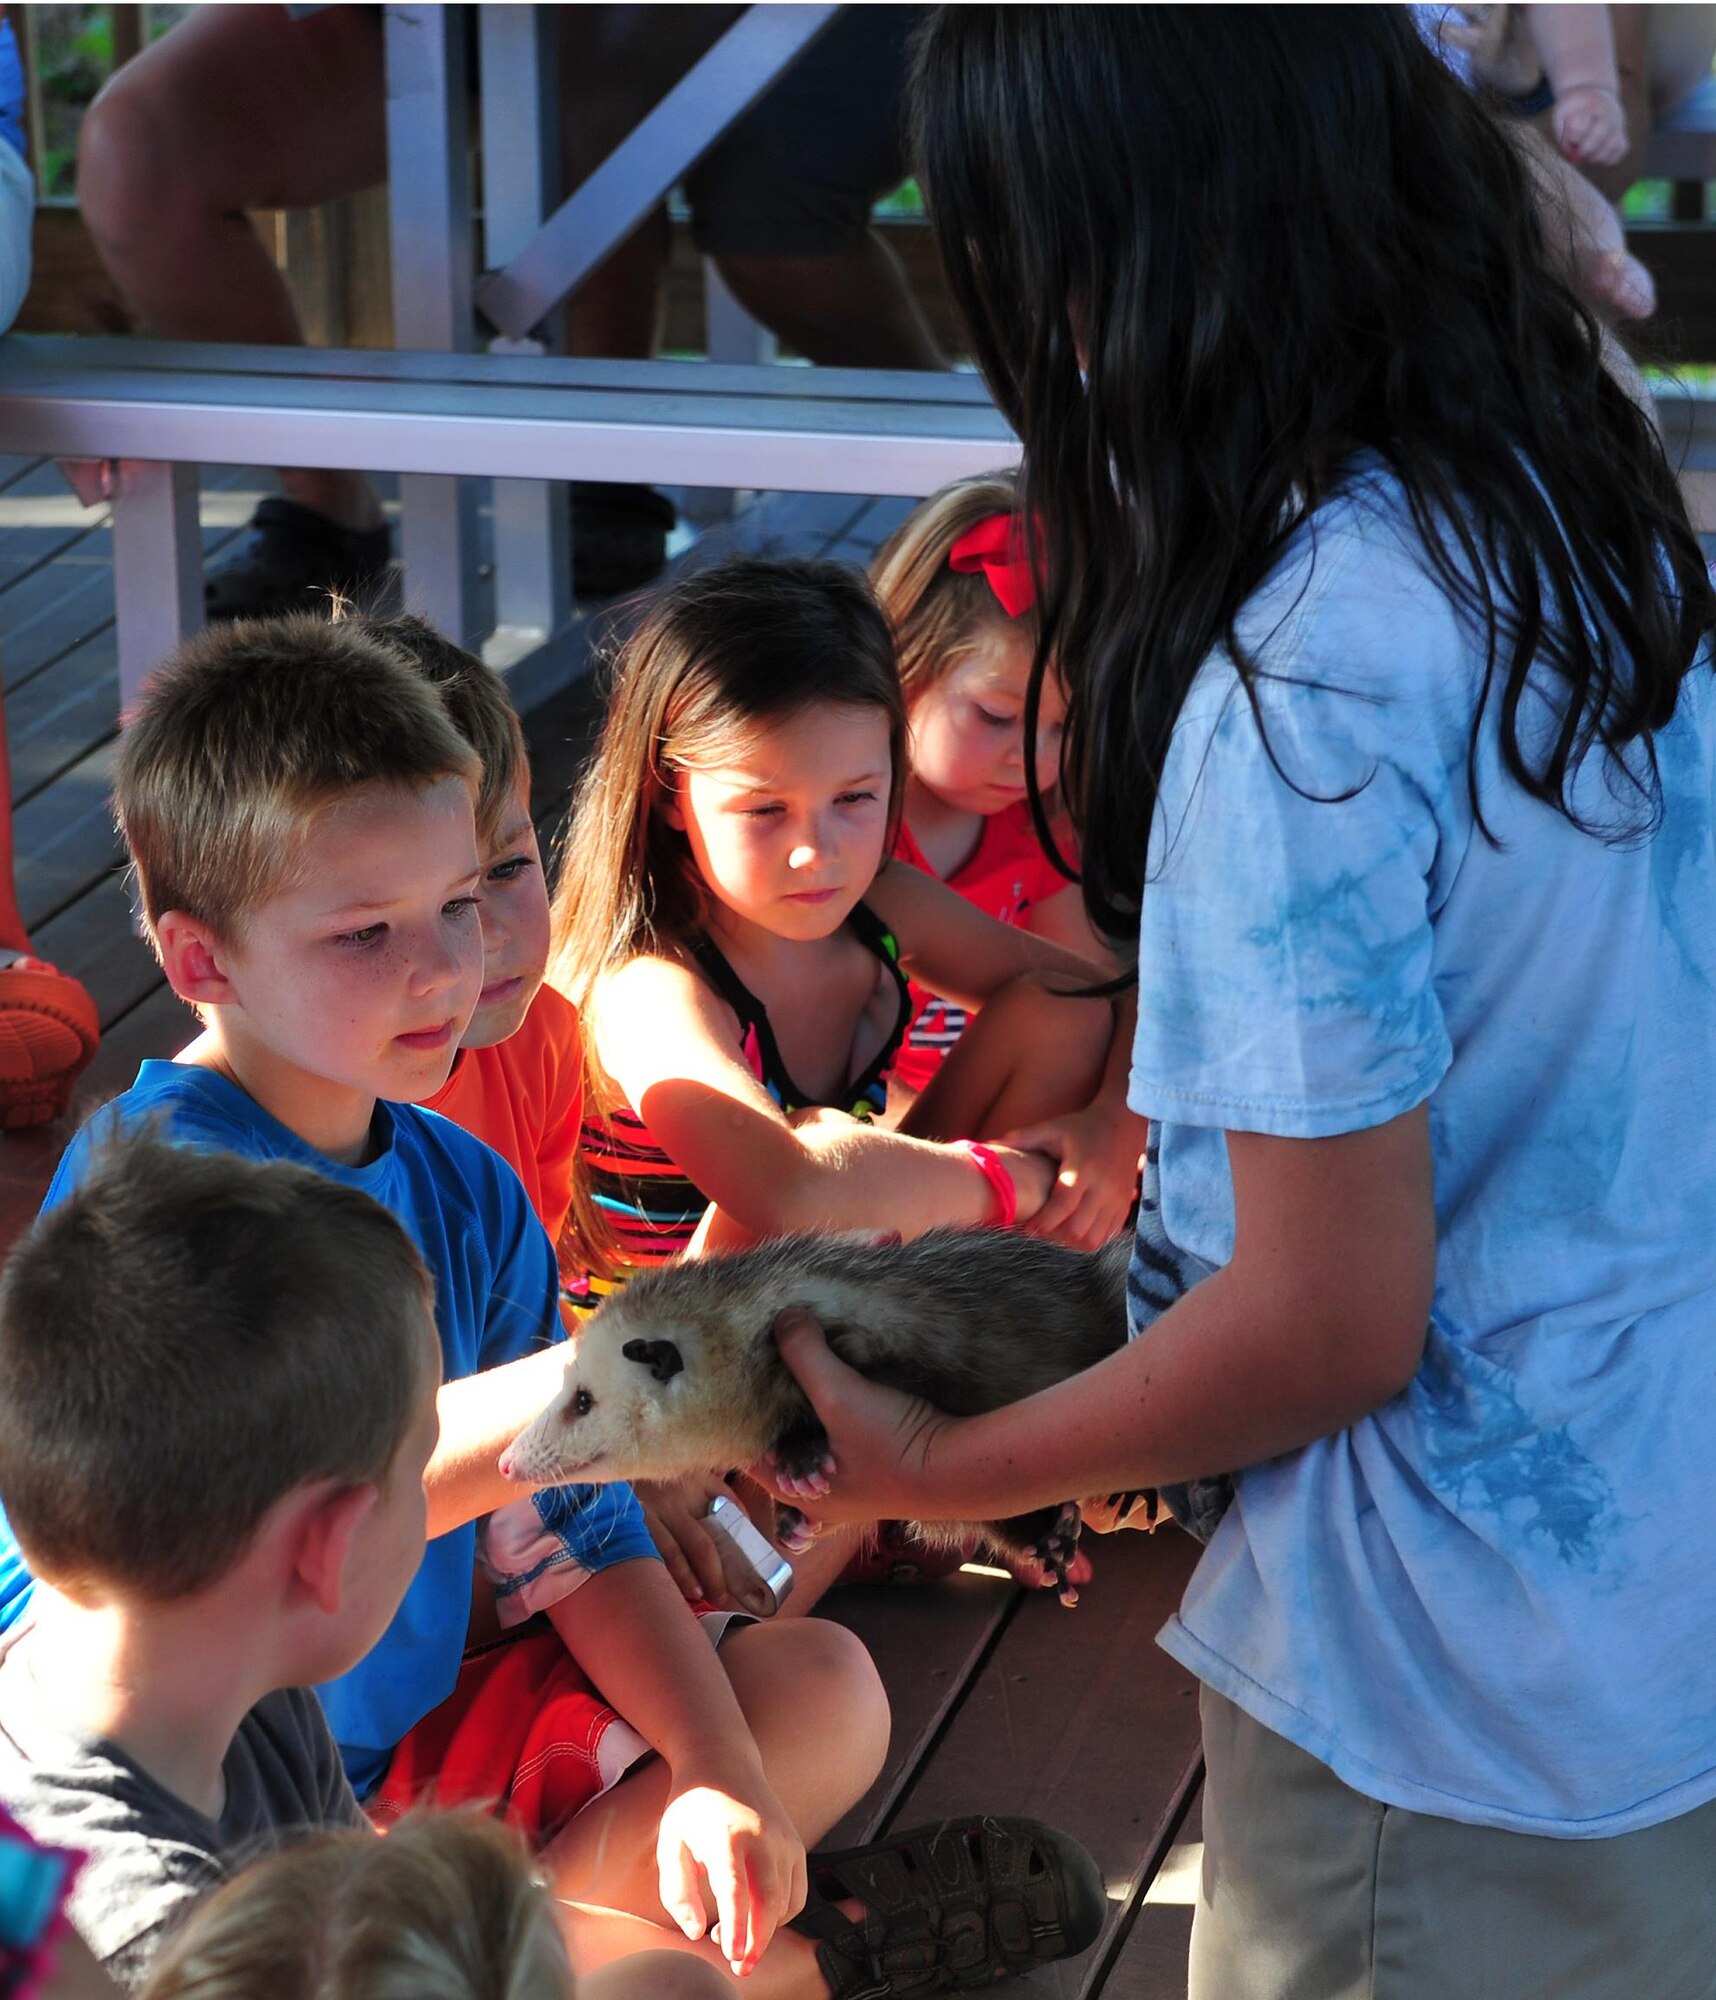 Hurlburt Field children pass around a possum during a animal encounter event at the Soundside Marina on Hurlburt Field, Fla., June 23, 2016. The animal introdctions were part of a Key Spouse and Deployed Family Barbeque, one of several events hosted by the Airmen and Family Readiness Center to help familes of deployed Airmen develope and stregthen their support network. (U.S. Air Force photo by Staff Sgt. Kentavist P. Brackin)